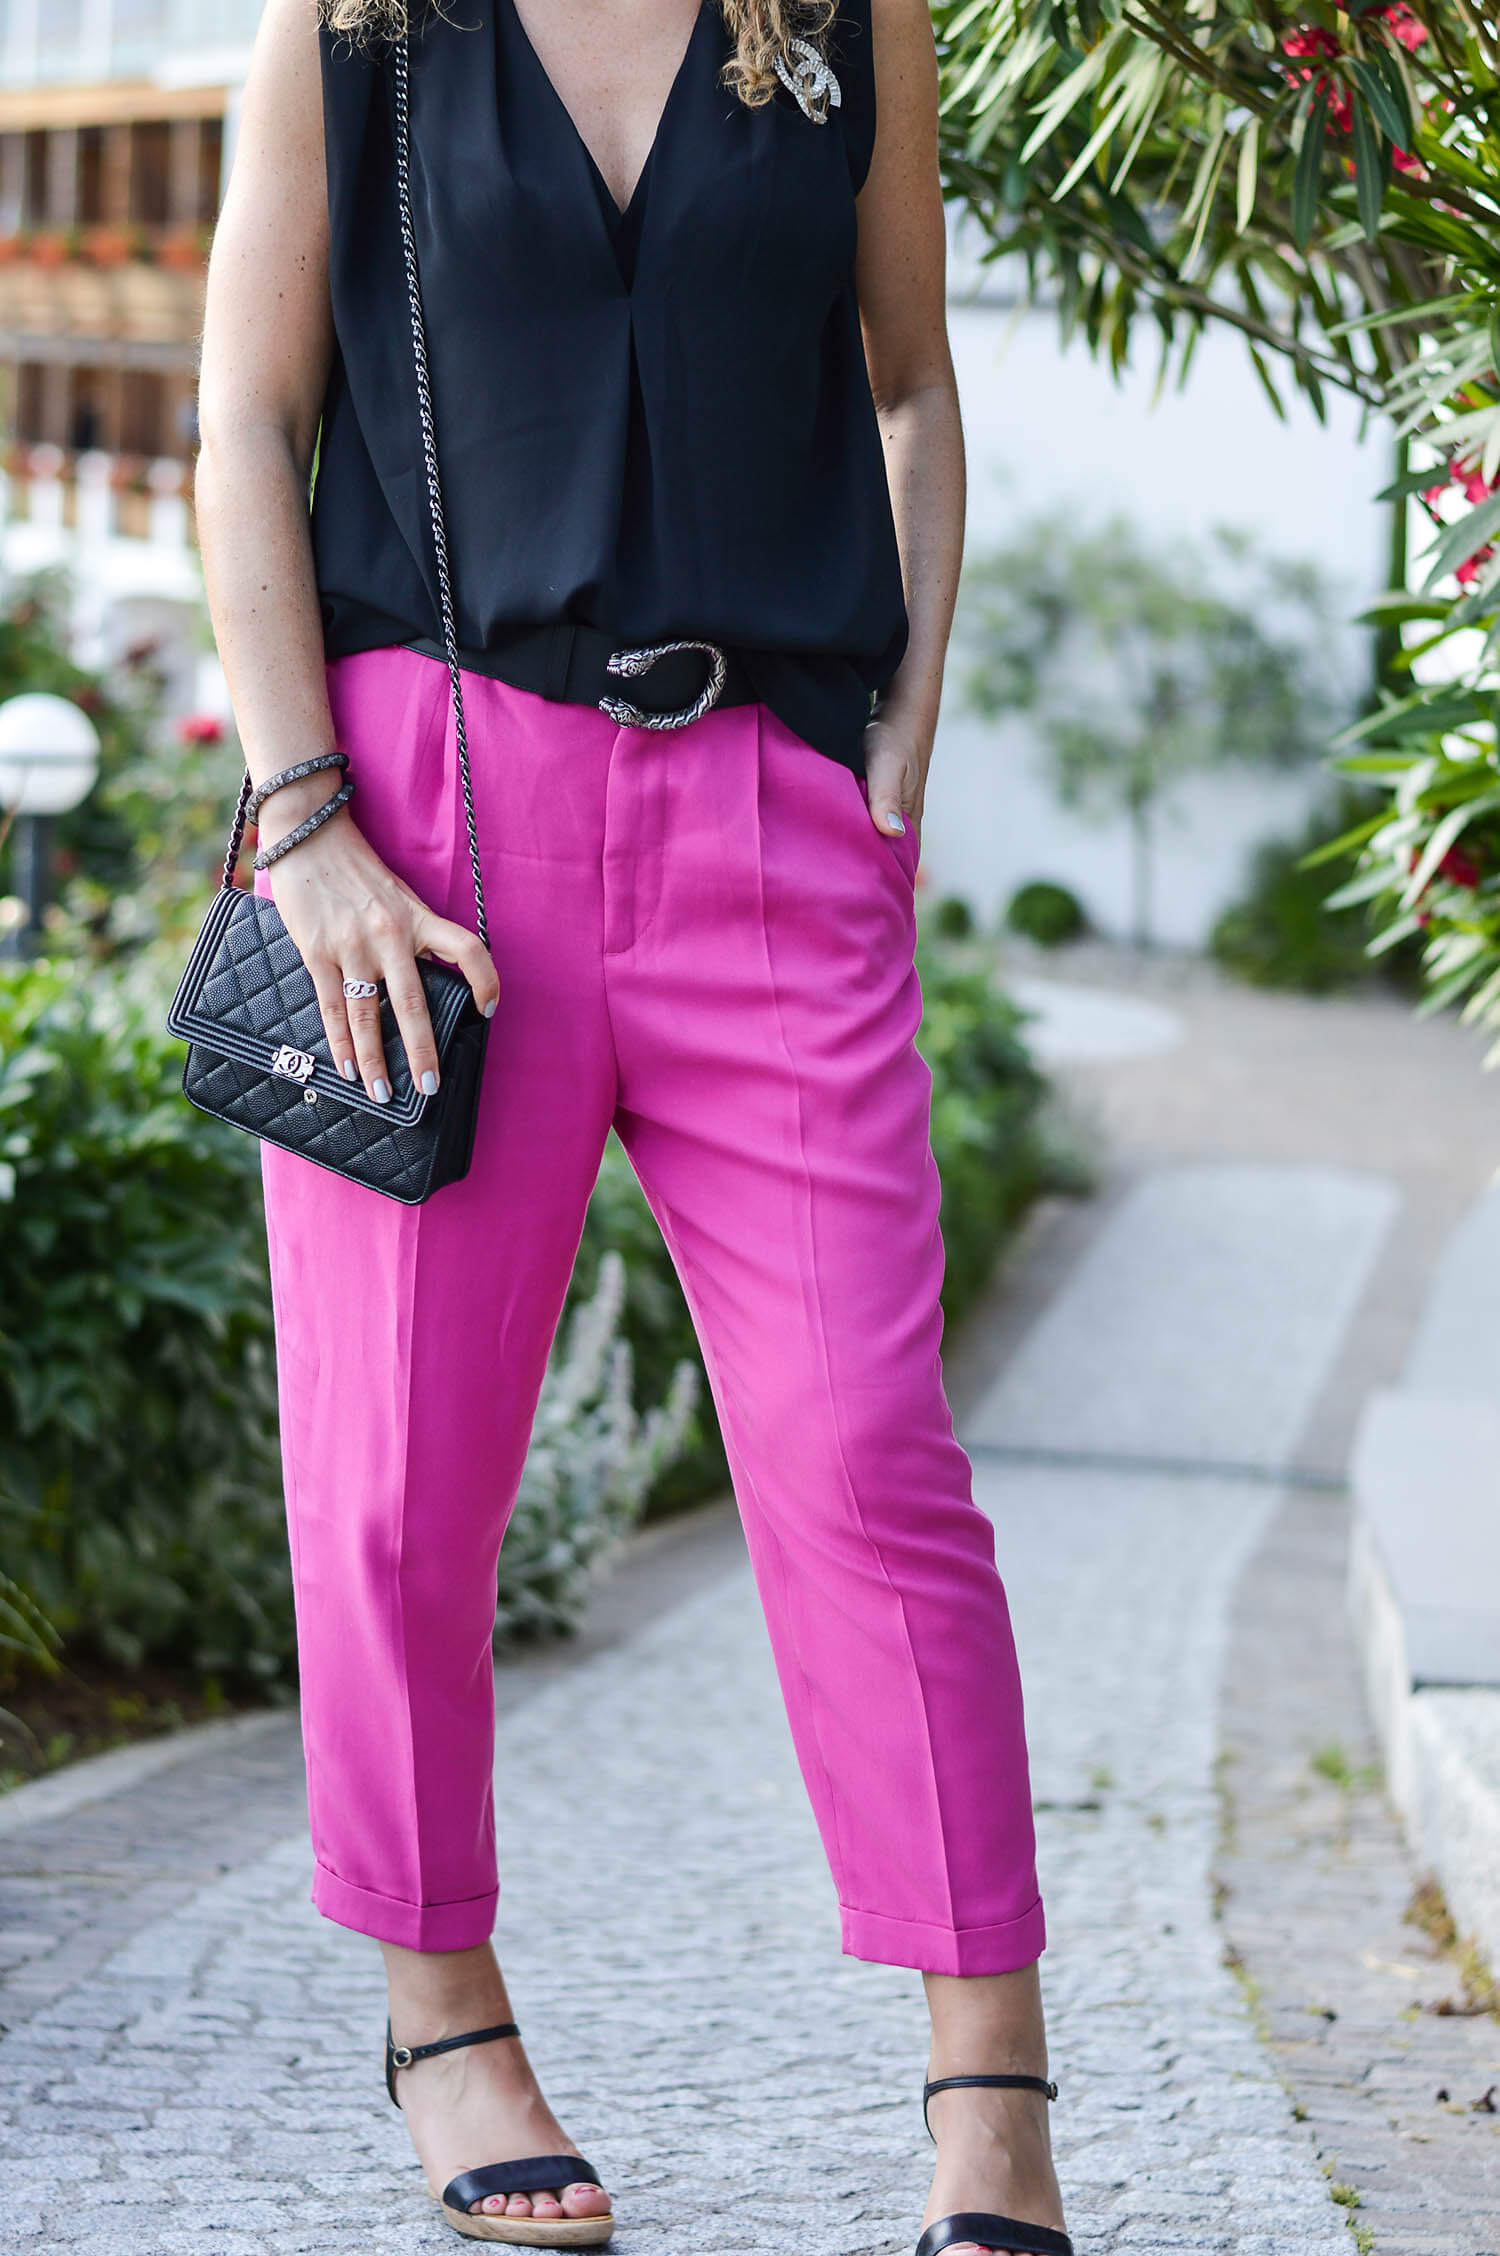 kationette-fashionblog-nrw-Outfit-Pink-Pants-Gucci-Belt-Chanel-Bag-South-Tyrol